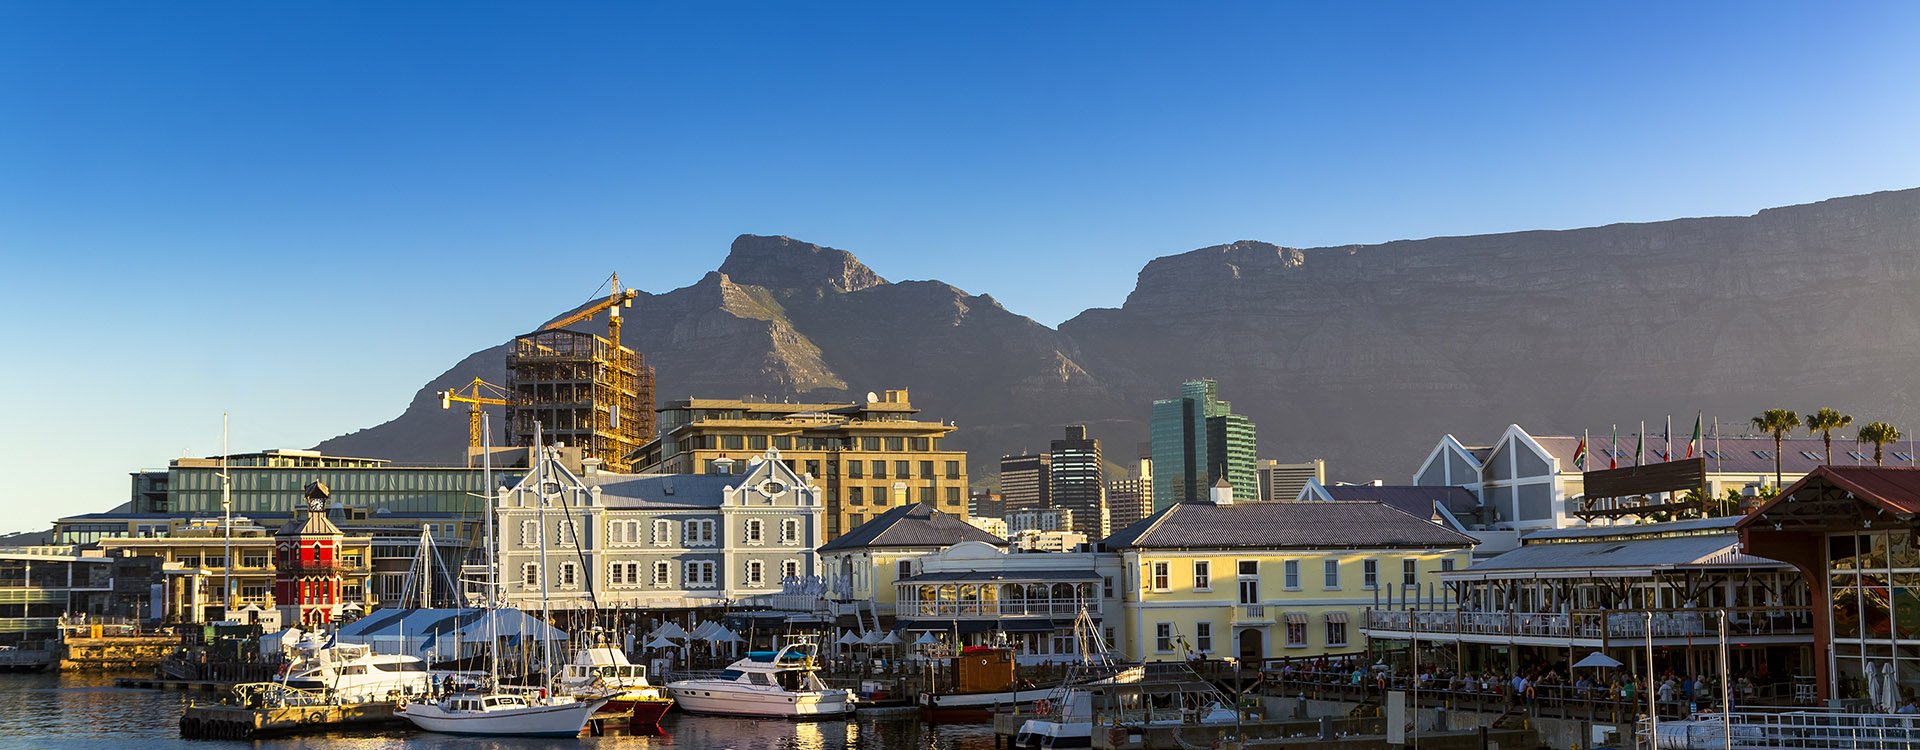 Republic of South Africa. Cape Town, Waterfront